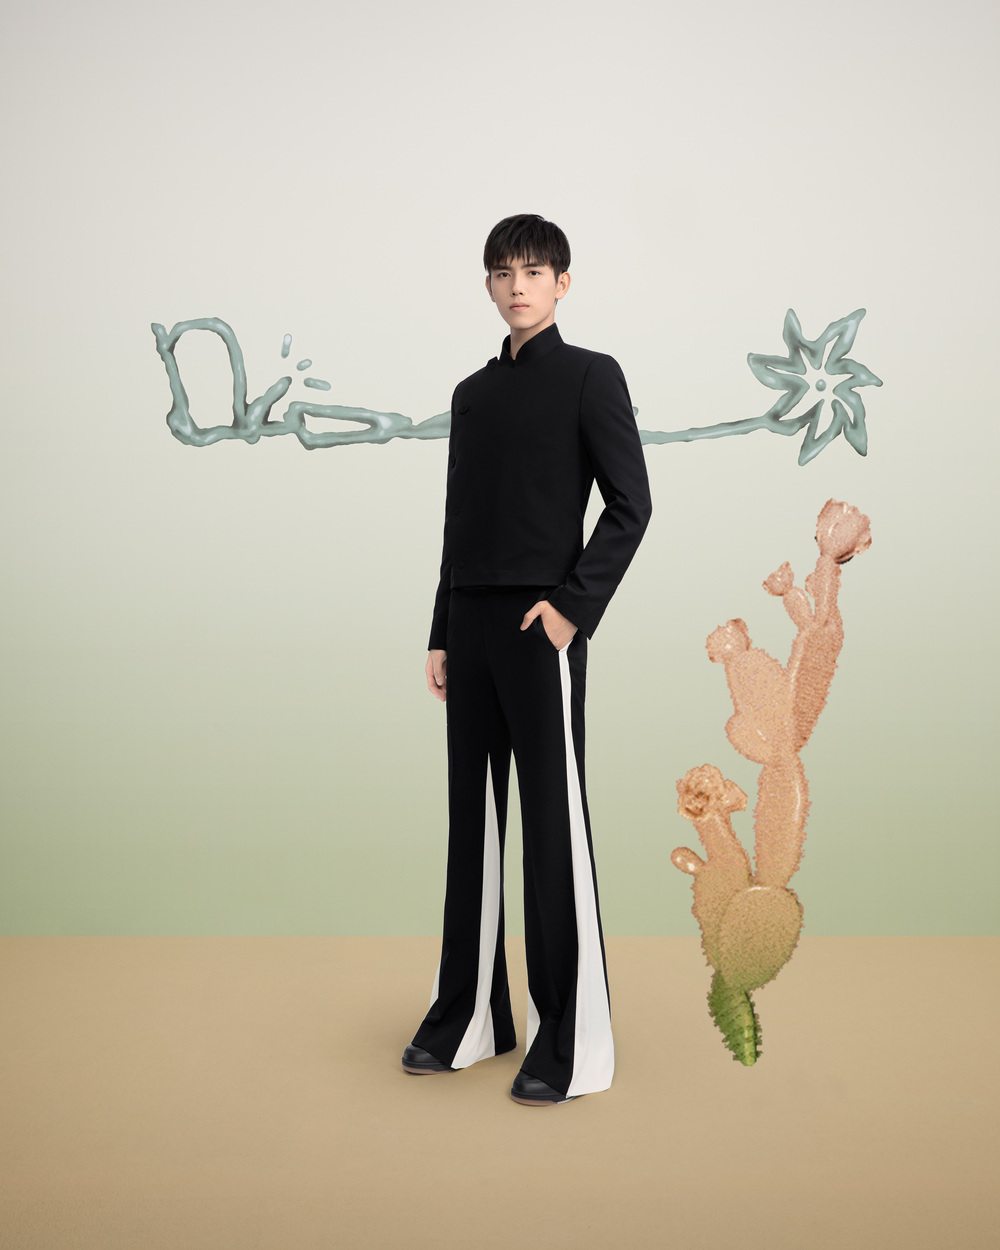 Arthur Chen wearing the Cactus Jack Dior collection 